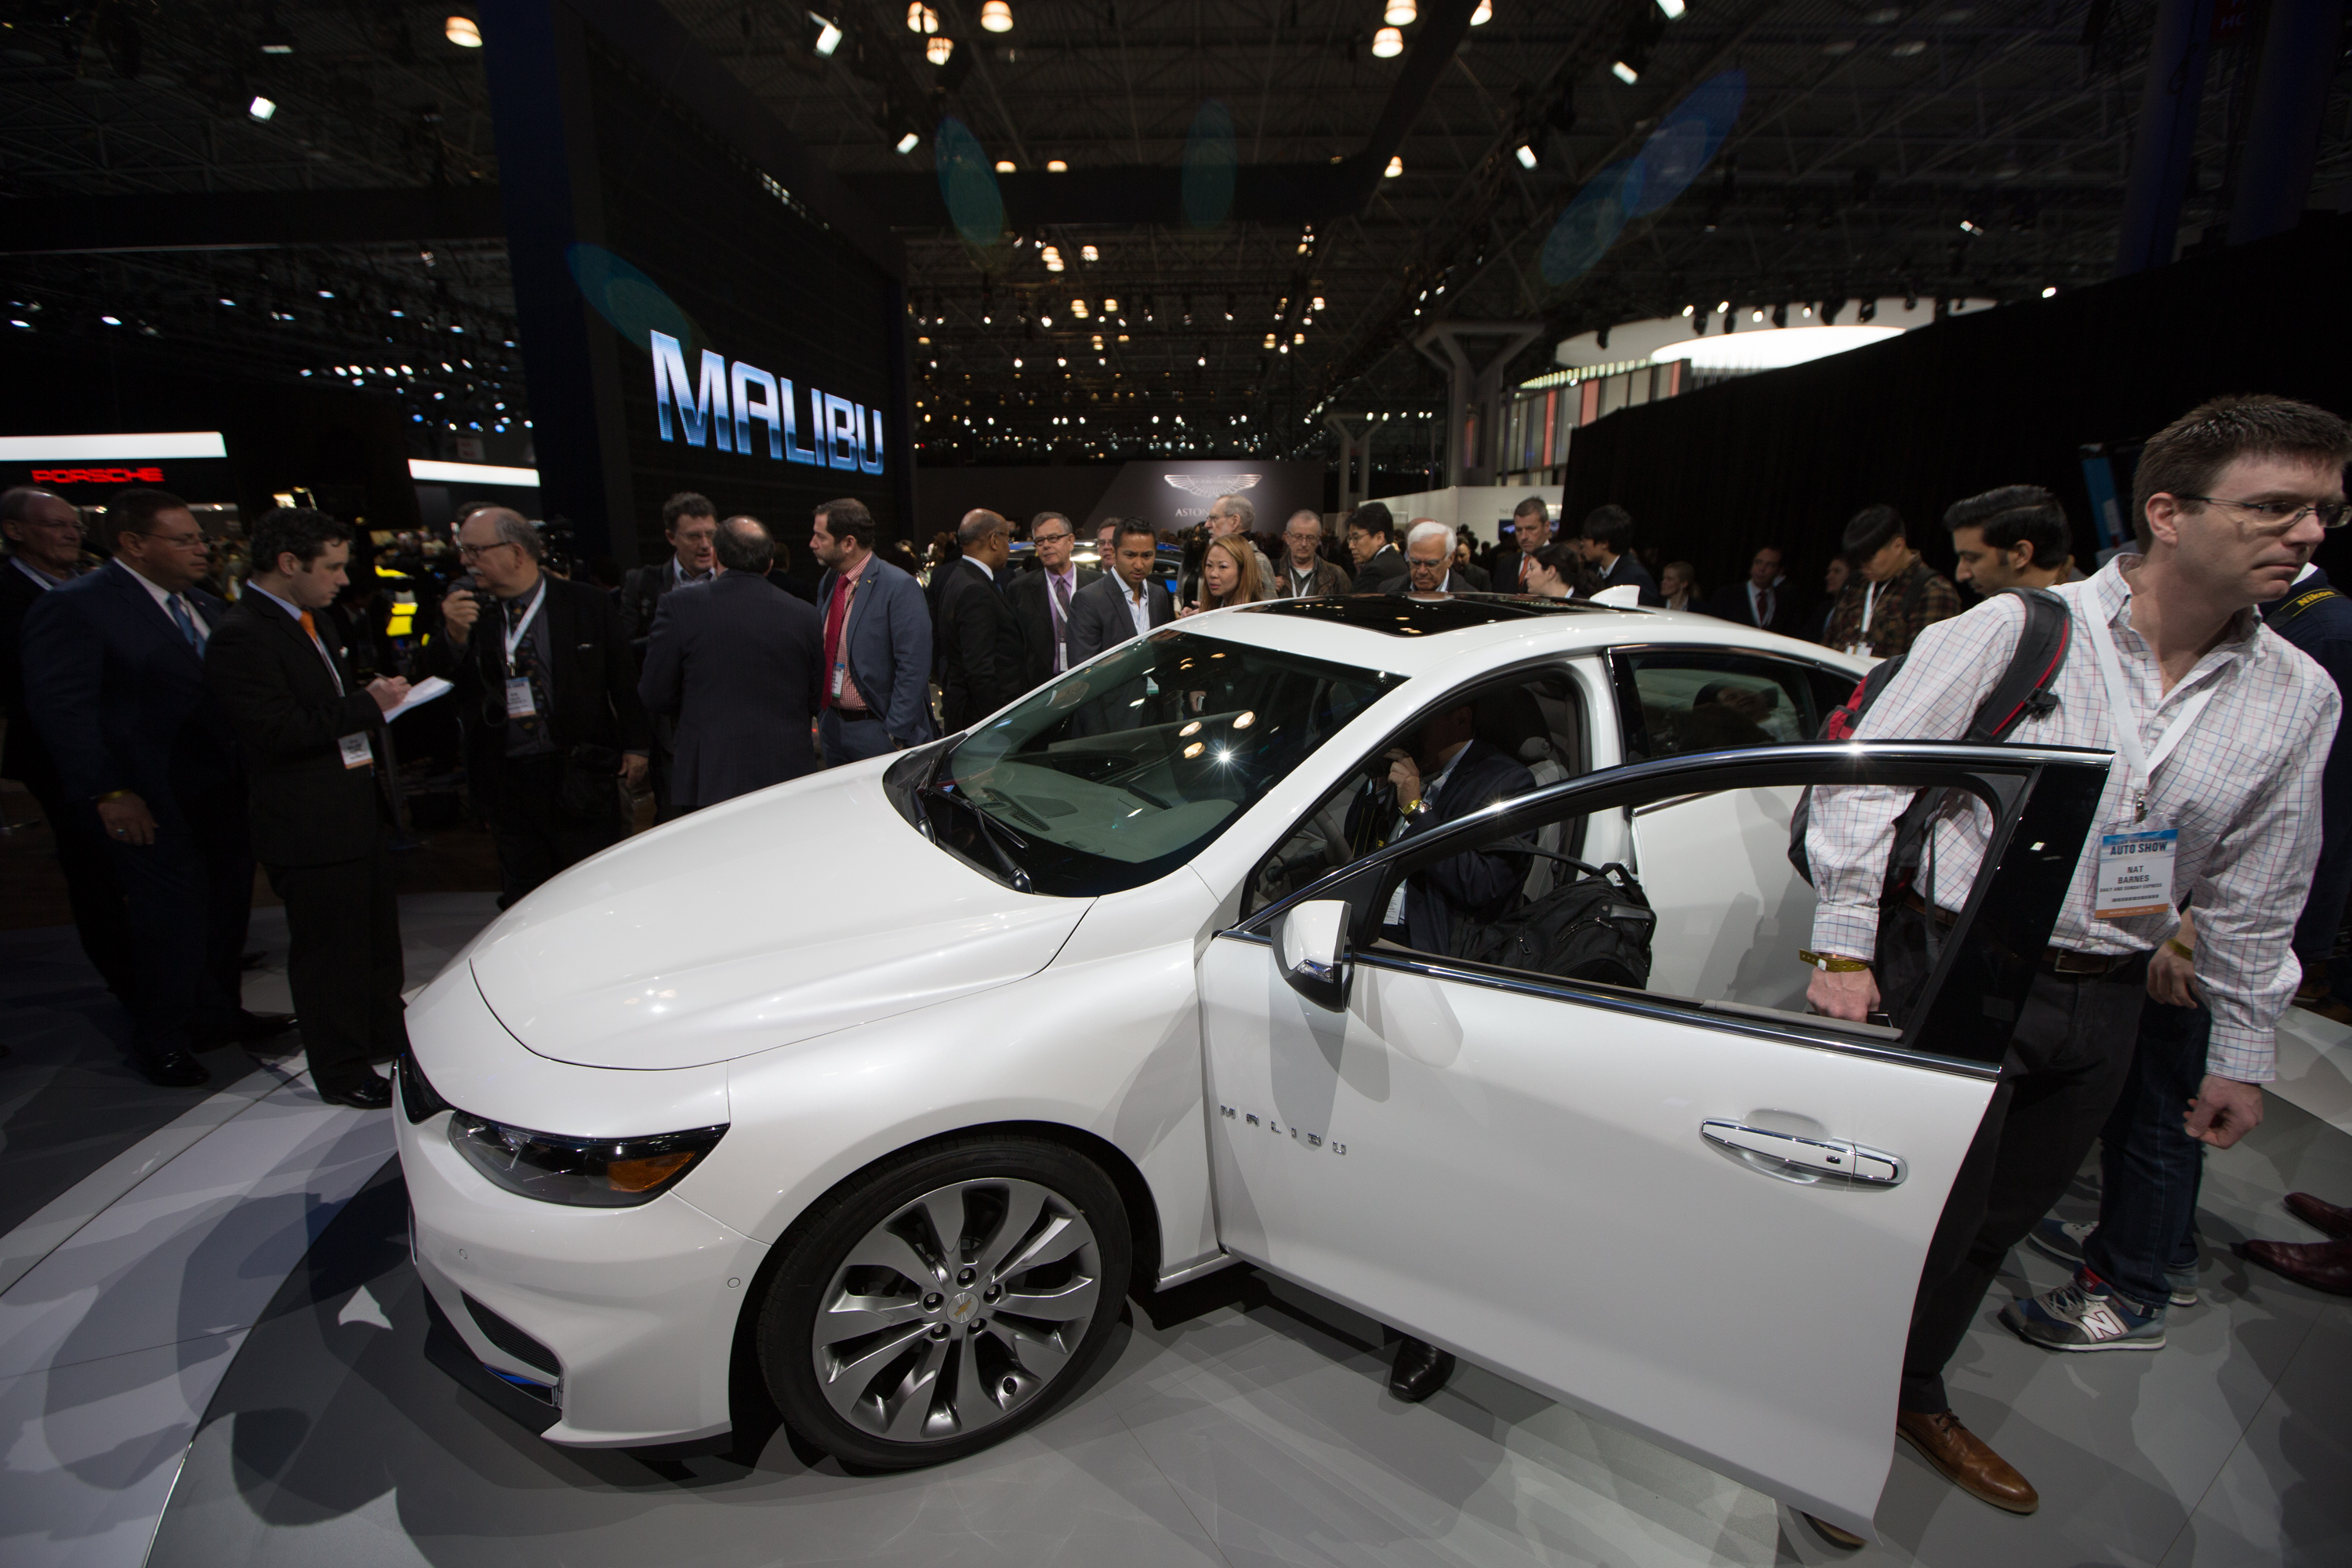 People checking out a Chevy Malibu at an auto show